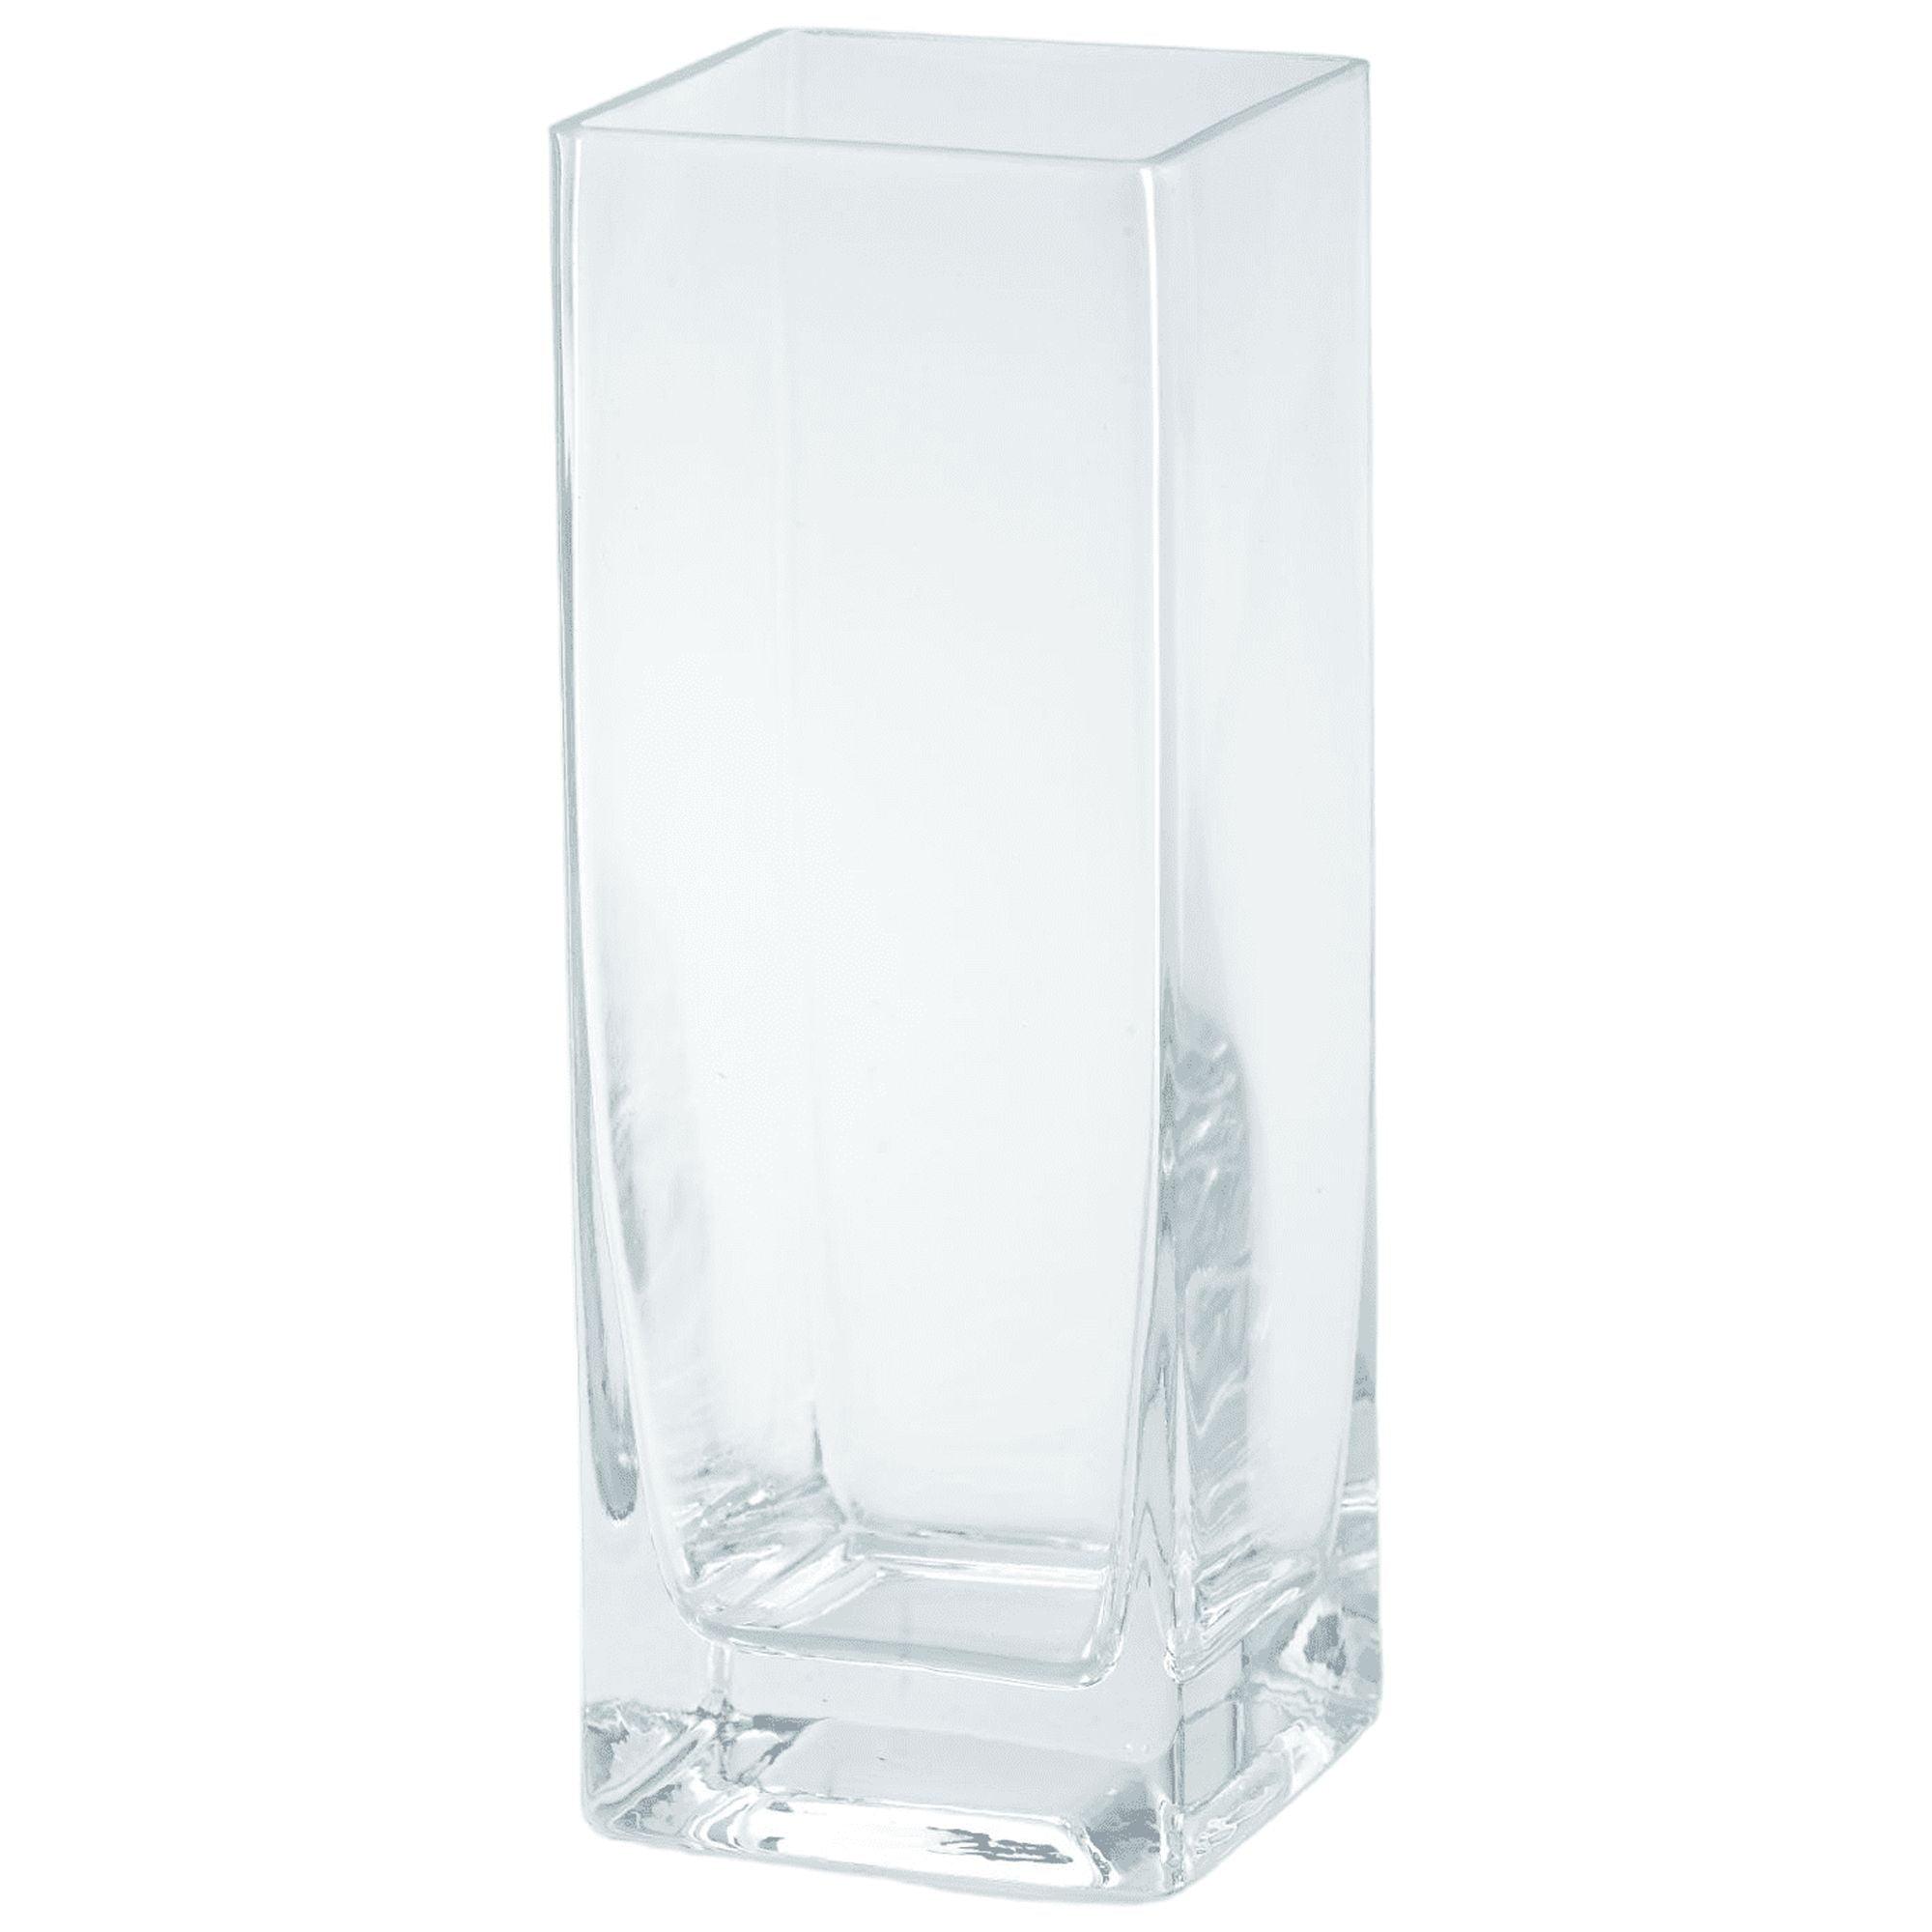 Elegant 8" Clear Glass Square Pillar Candle Holder